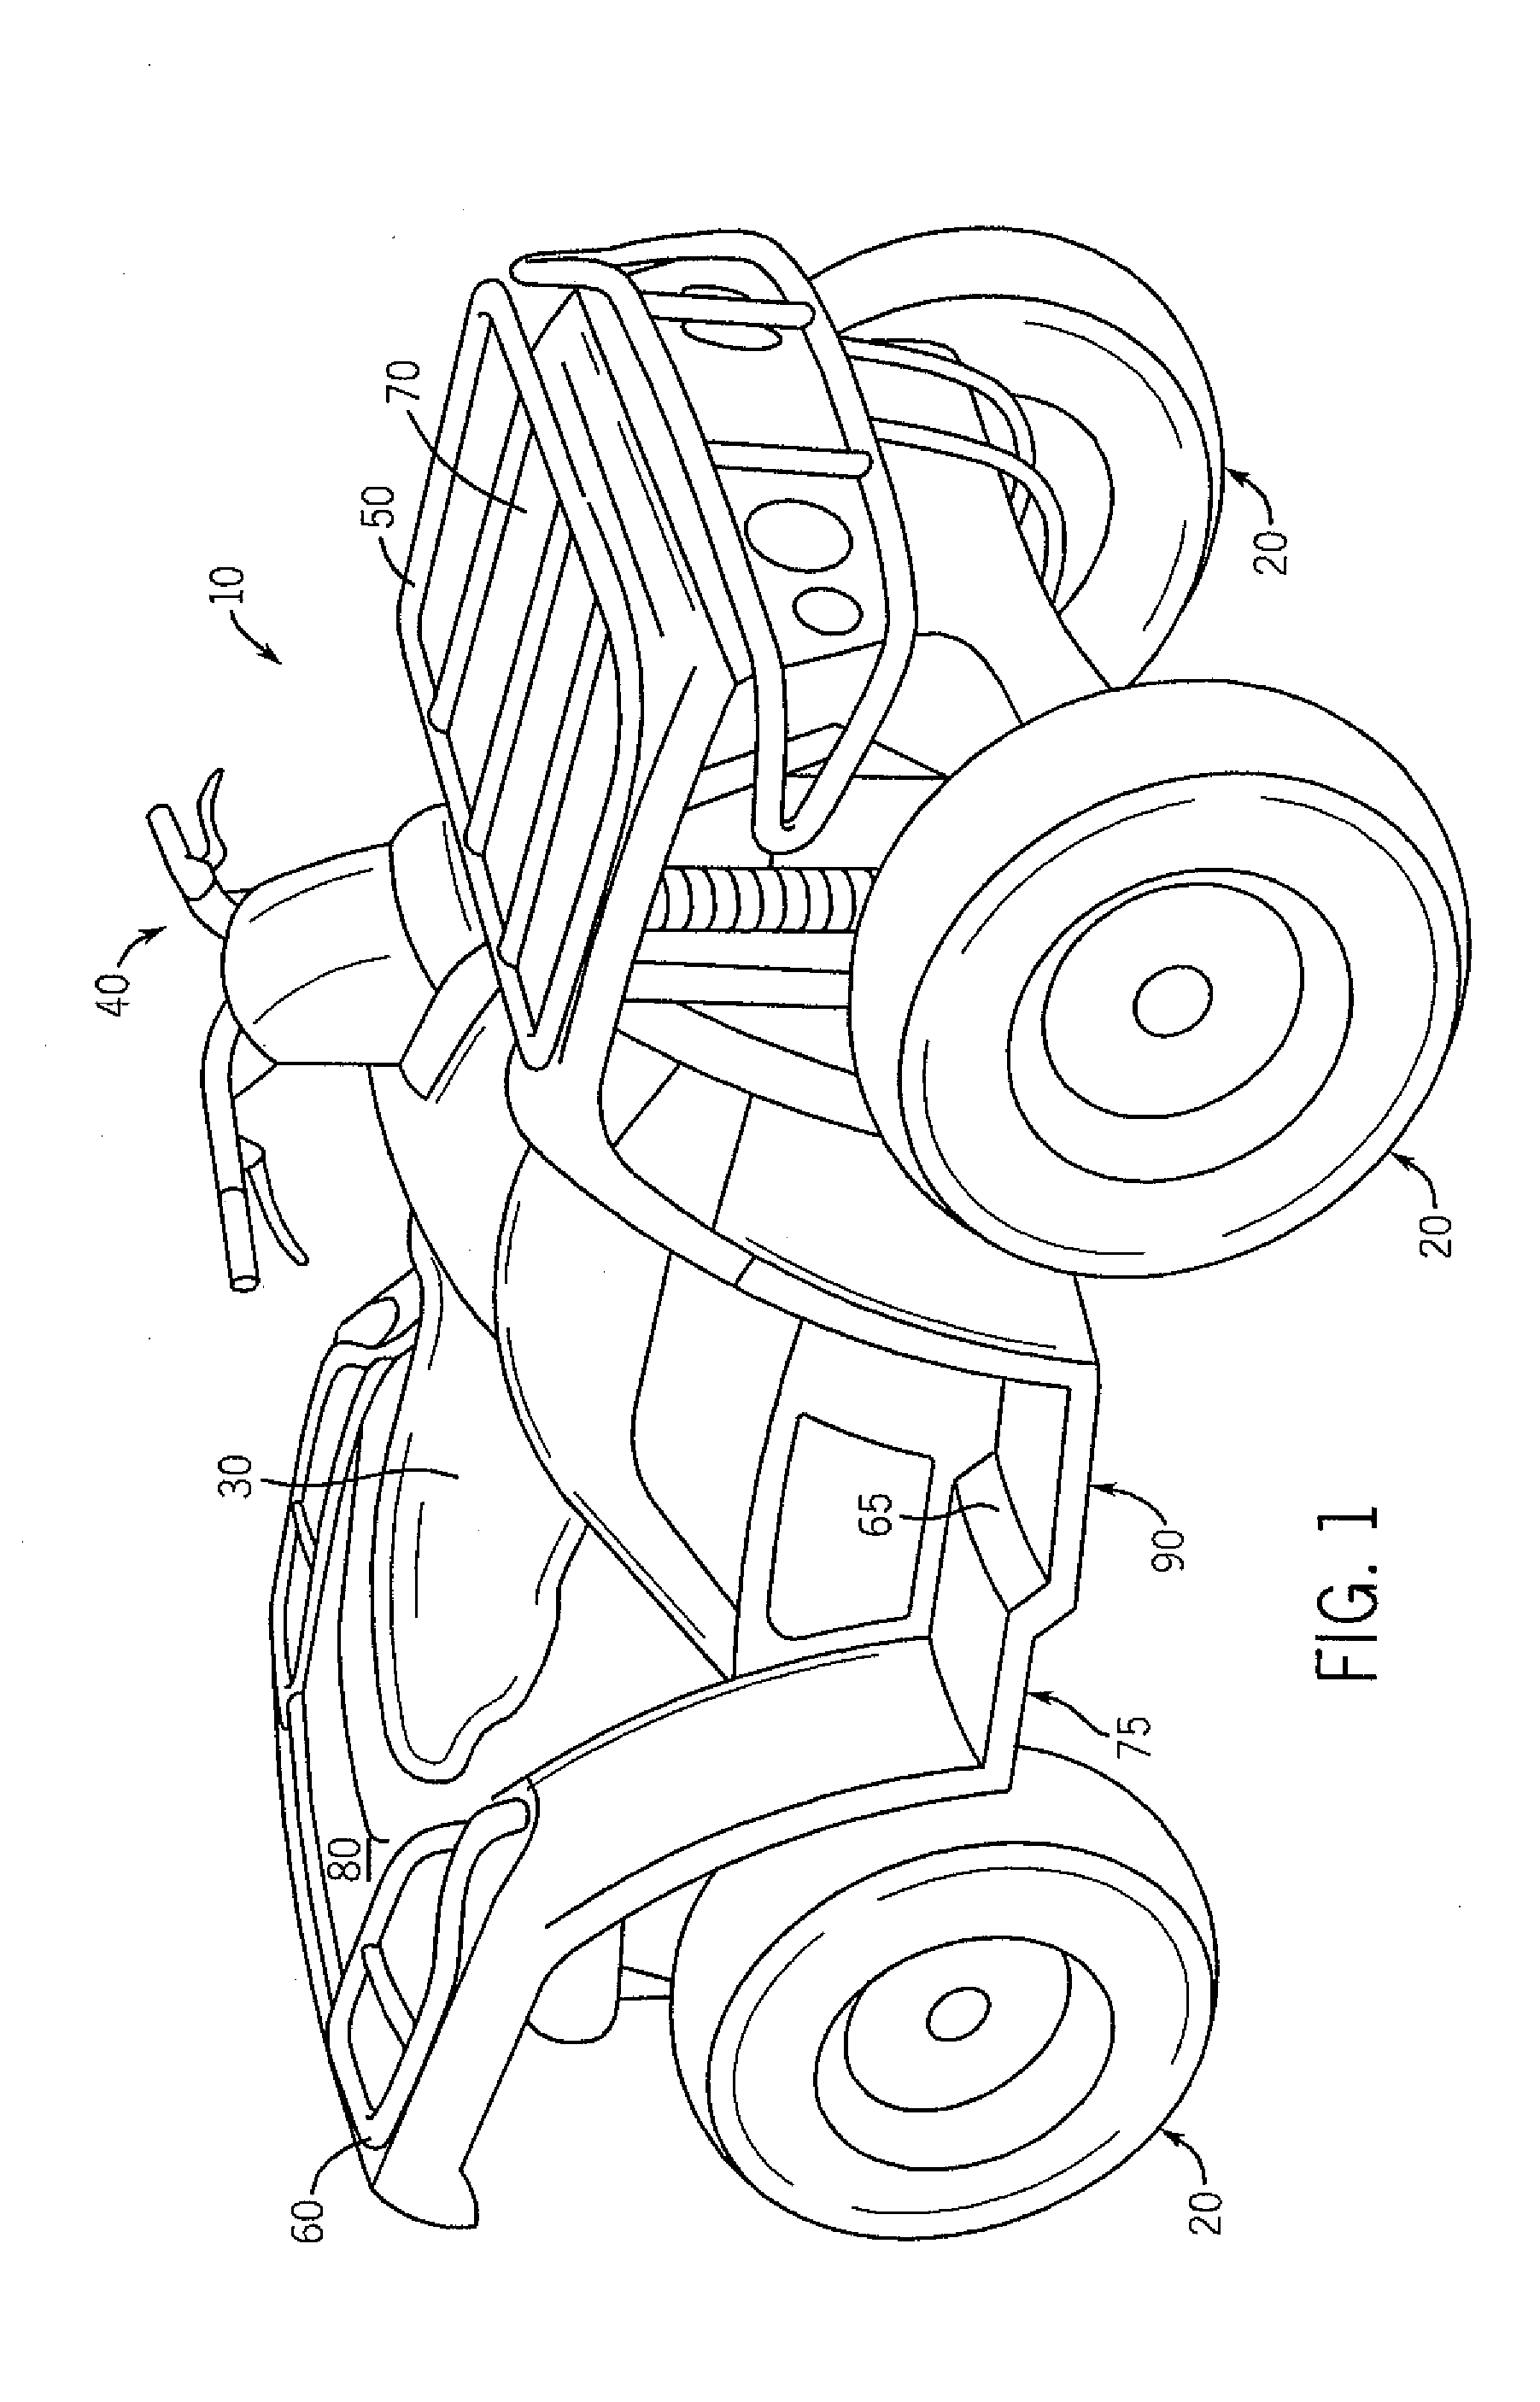 Reduced-size vehicle with compartments providing buoyancy